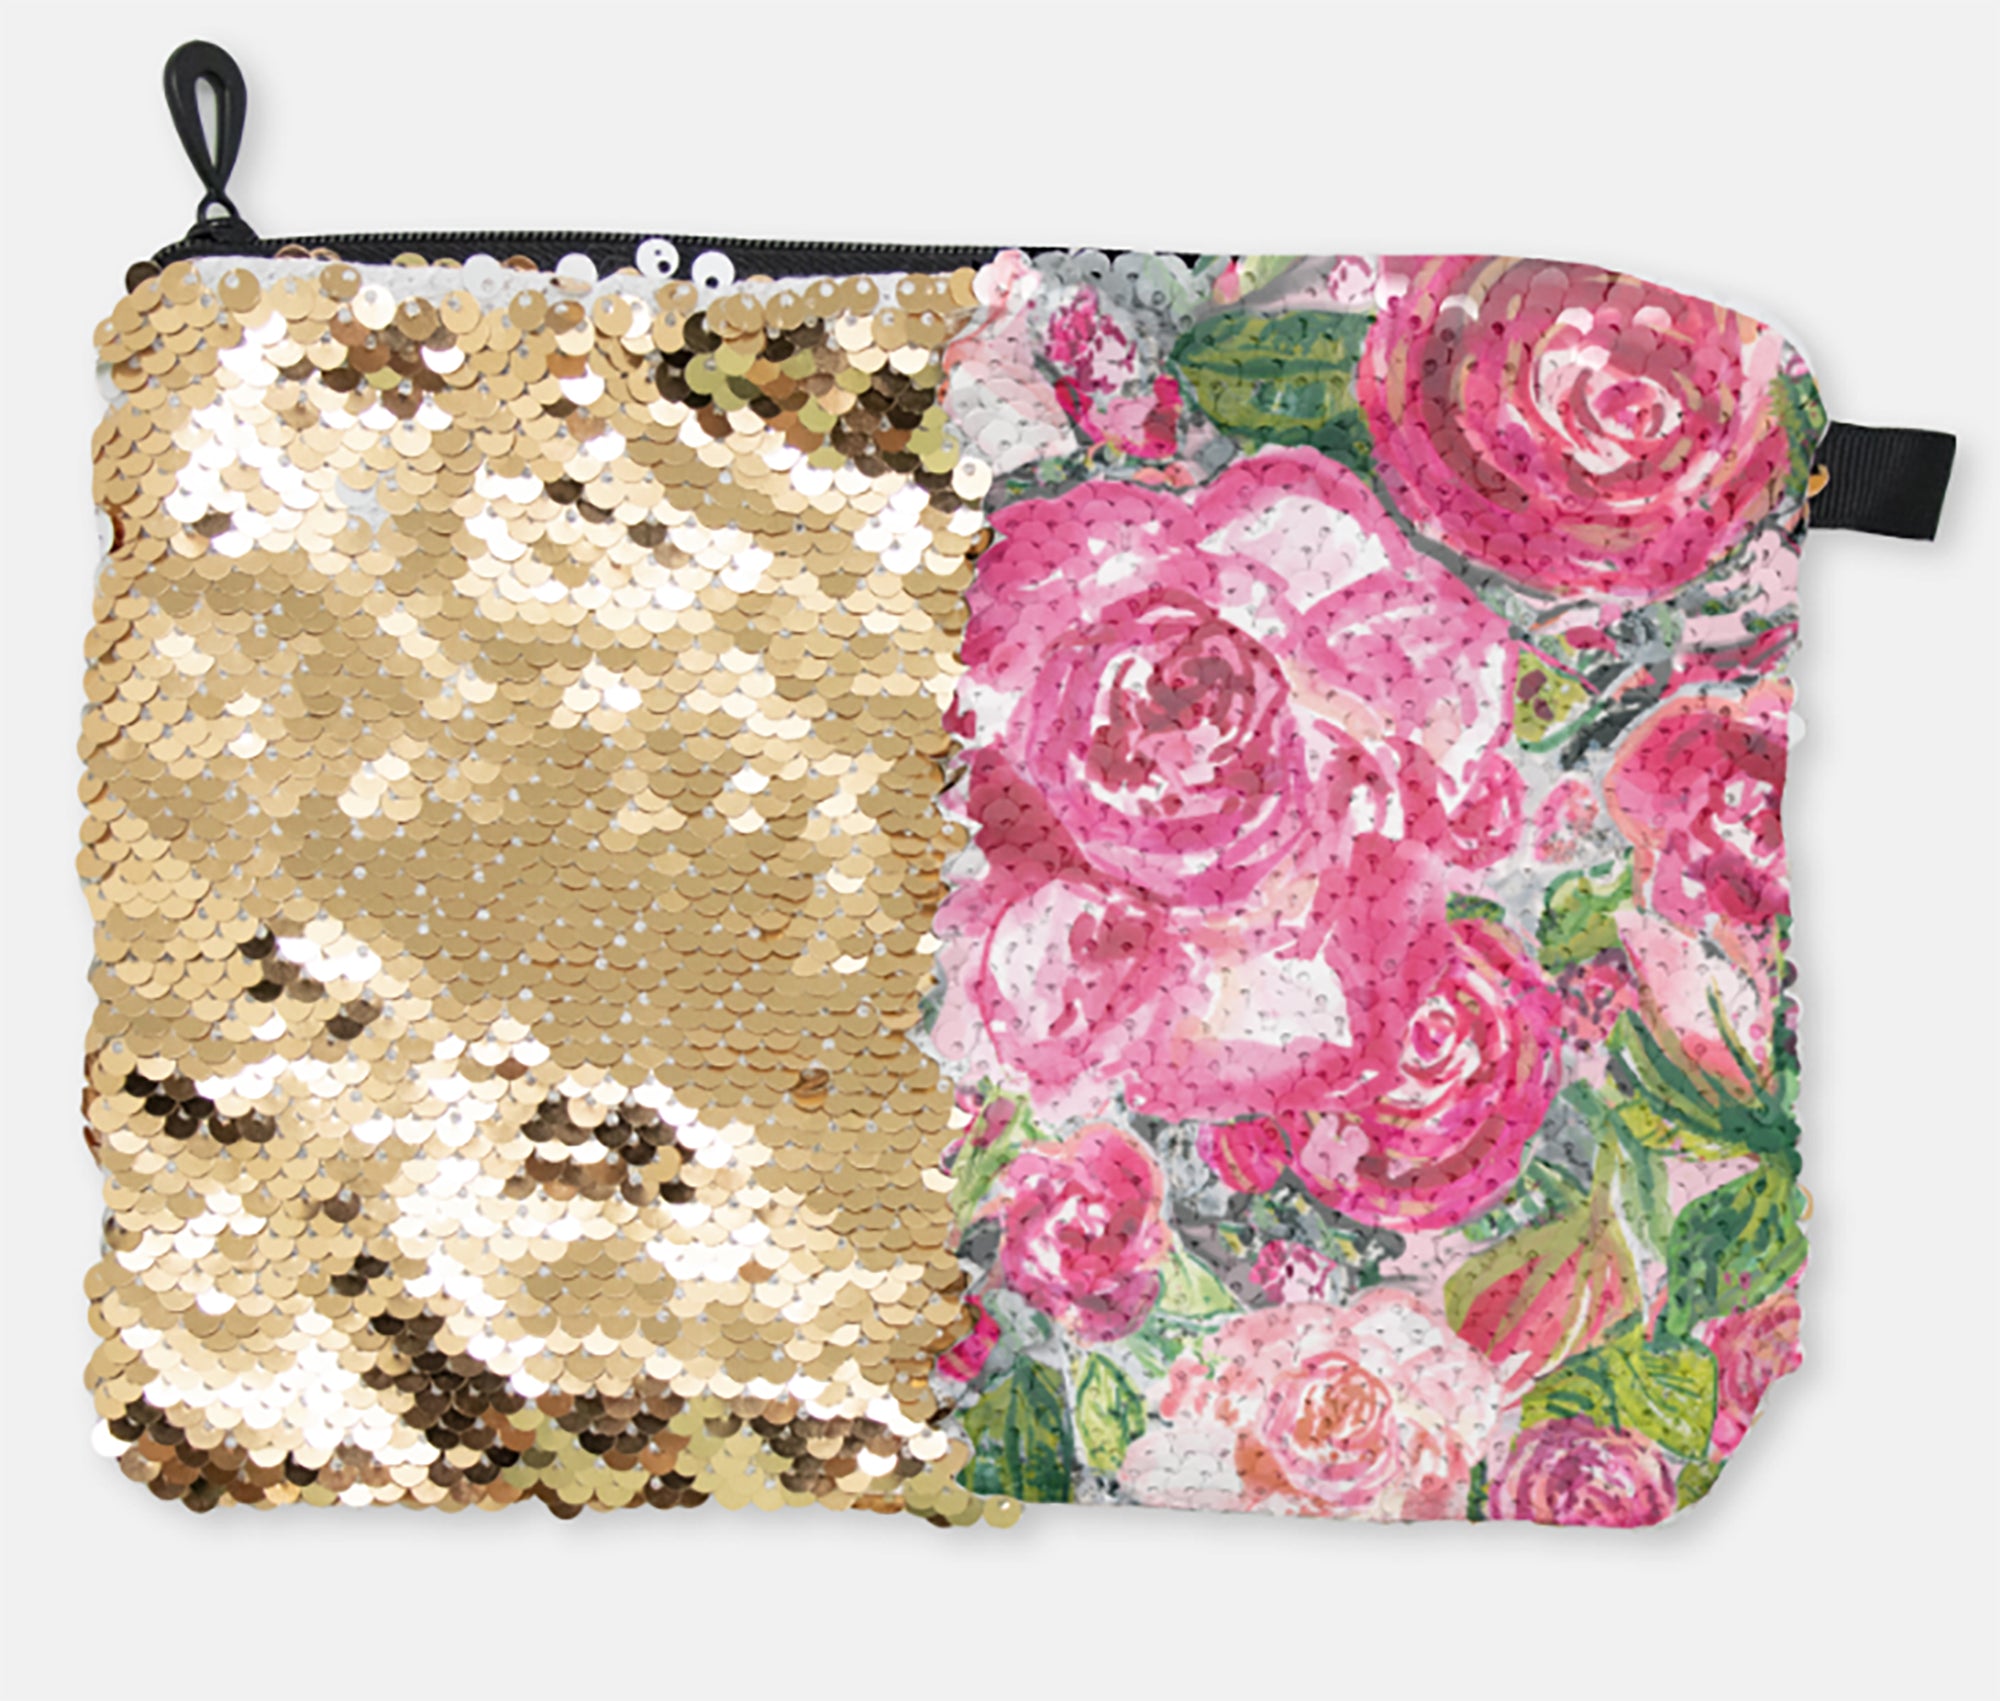 COSMETIC BAG - ROSE'S COTTAGE / GOLD SEQUINS - Dreams After All